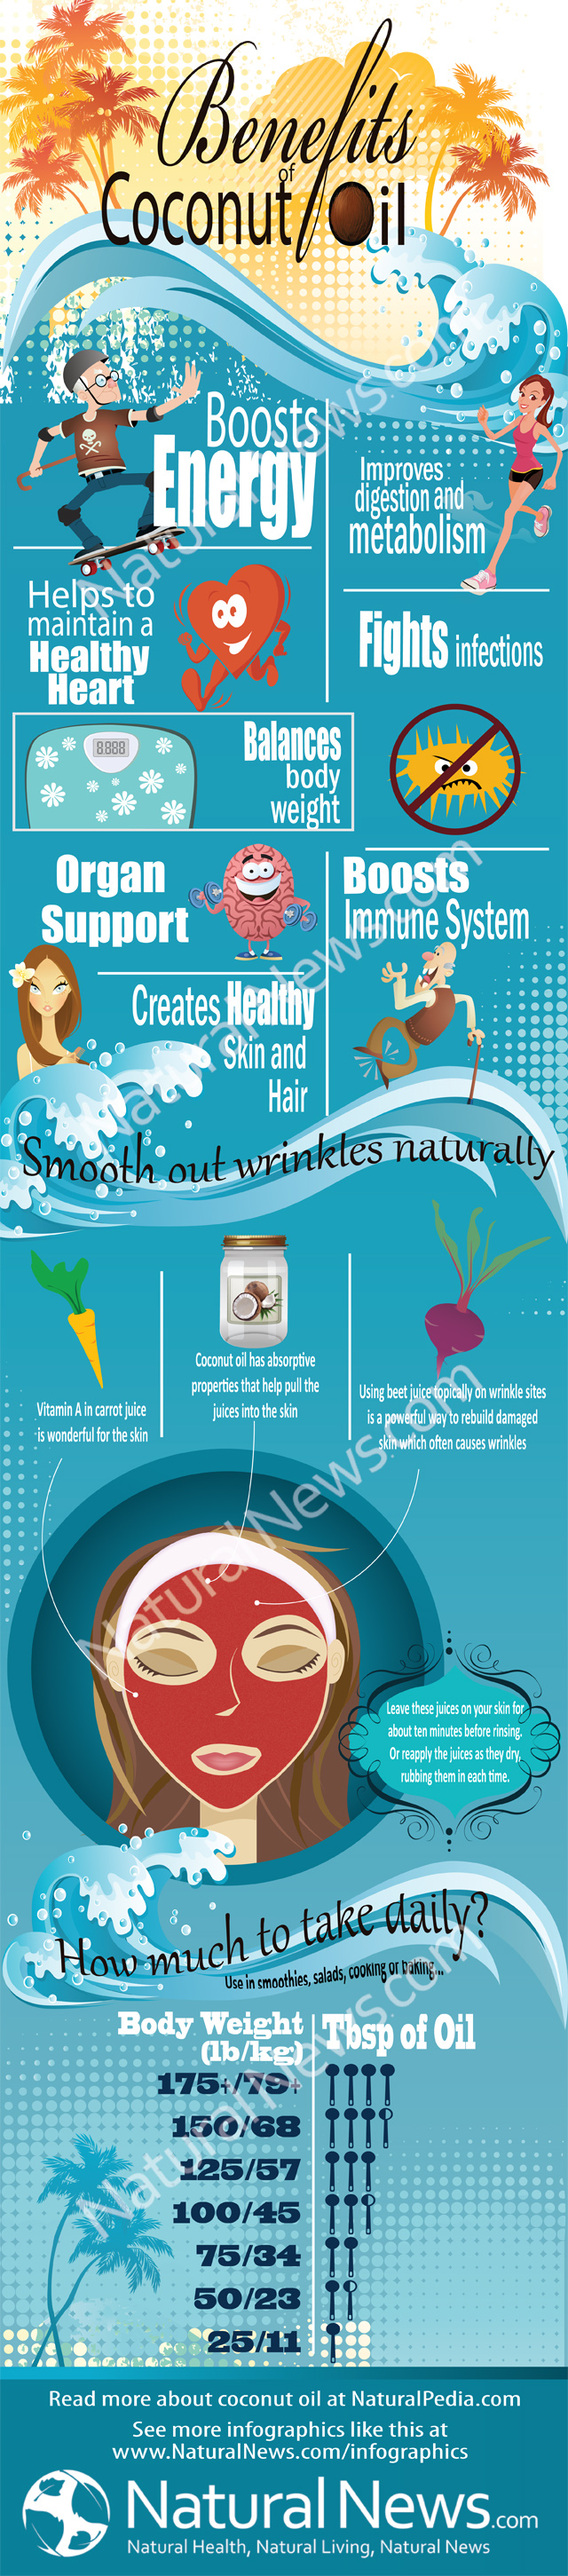 Enjoy the Health Benefits of Coconut Oil!